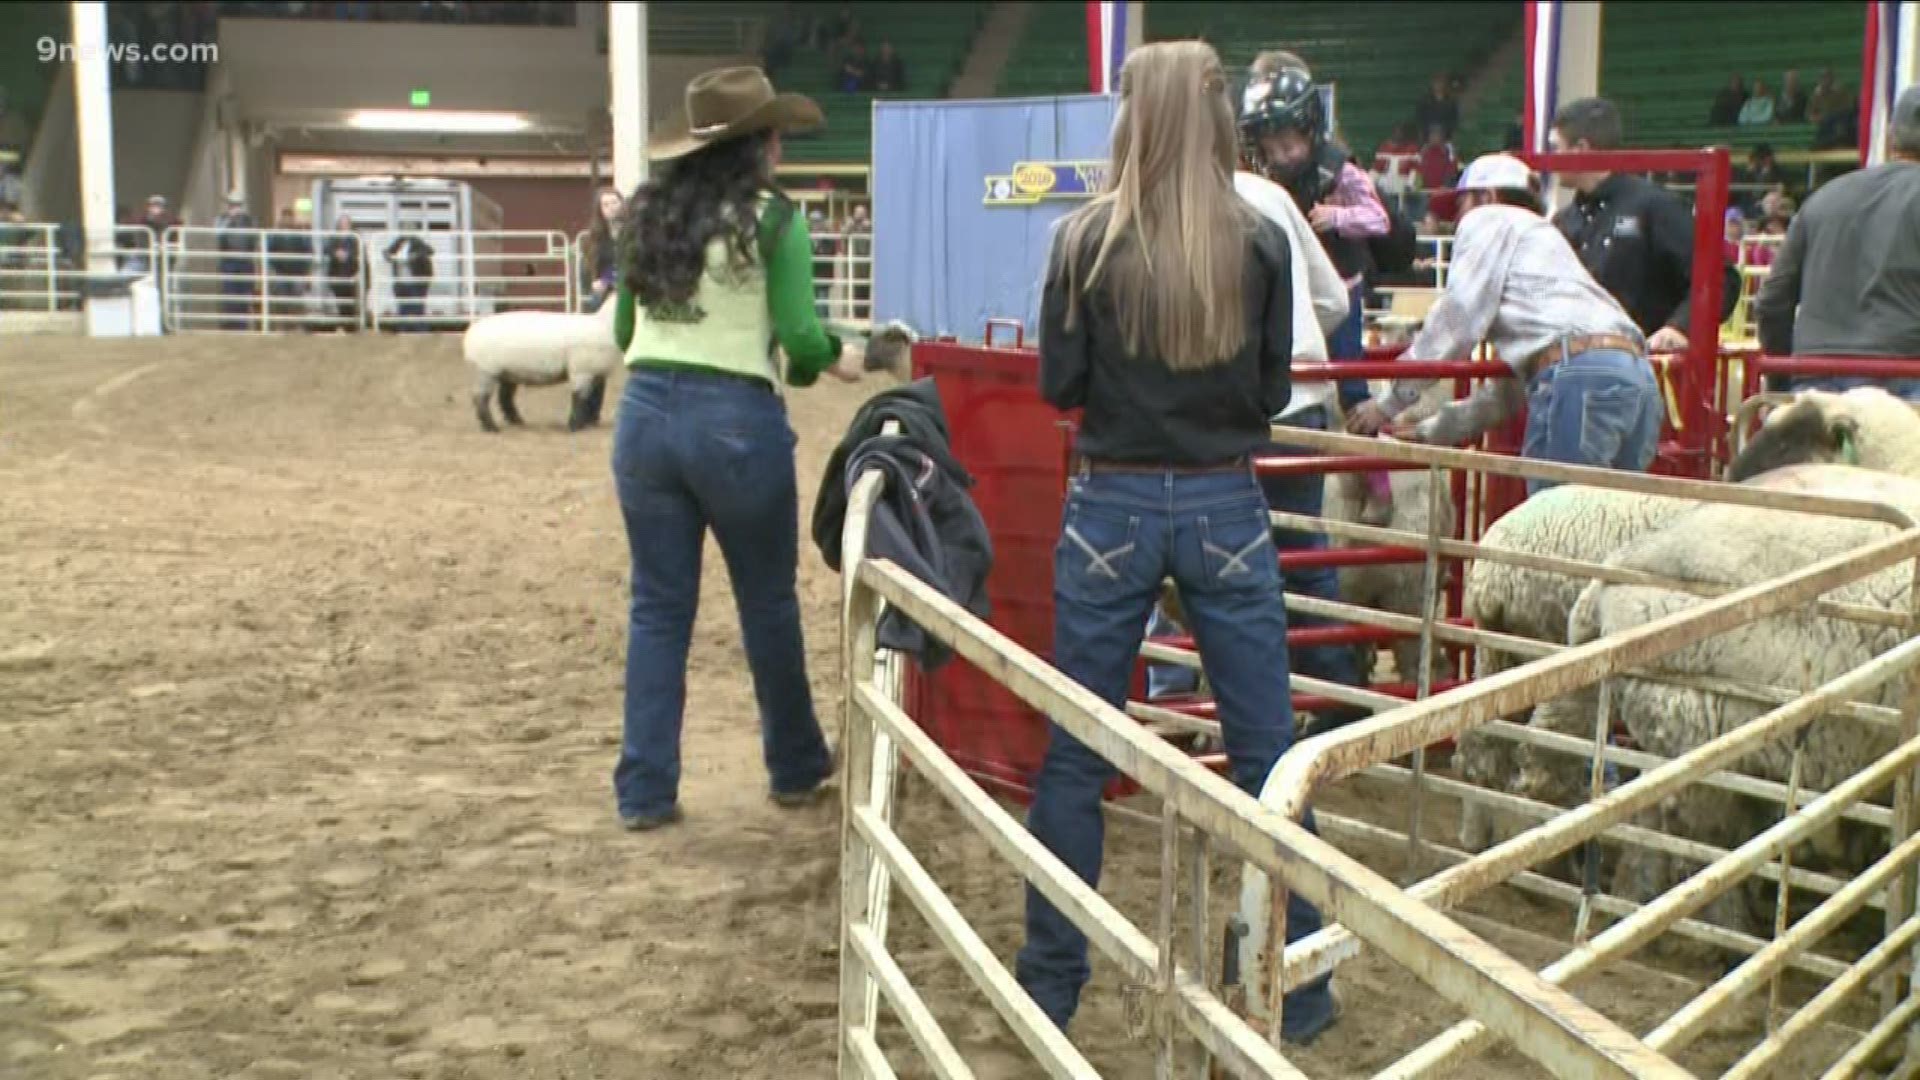 Hundreds of thousands of people visit the stock show each year, which runs through January 26.